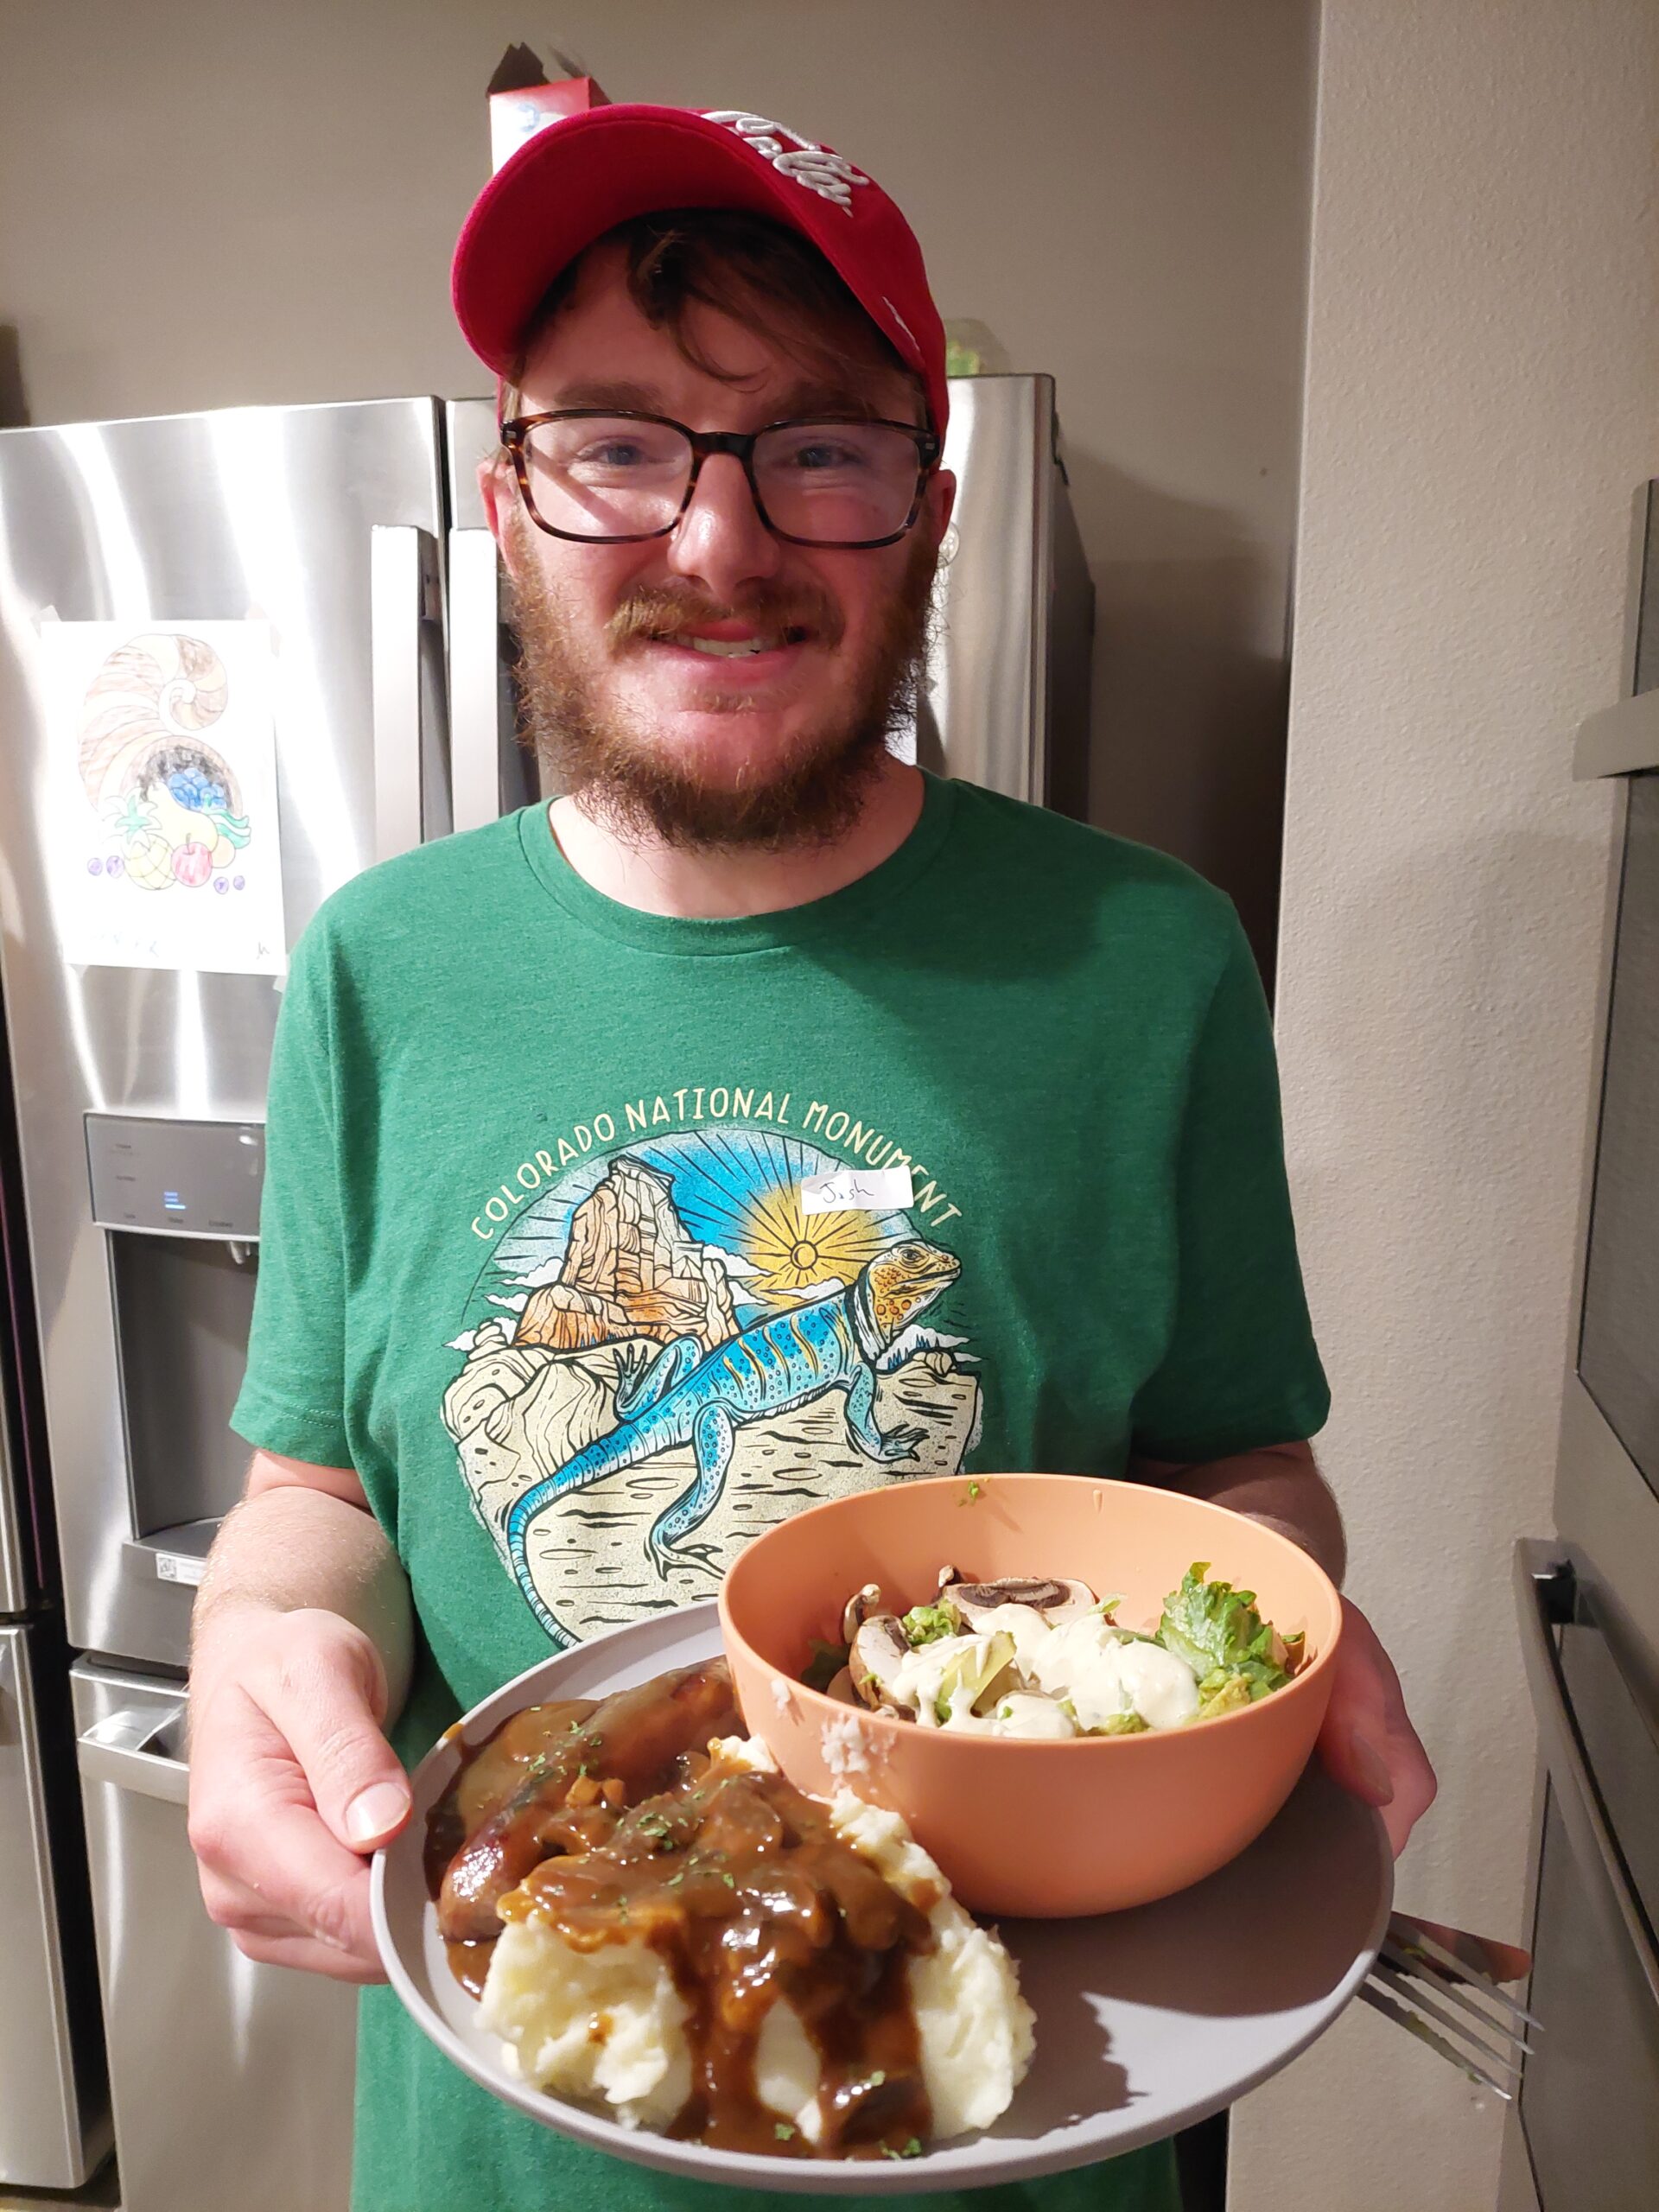 young adult stands smiling at the viewer wearing a green shirt holding a plate of food